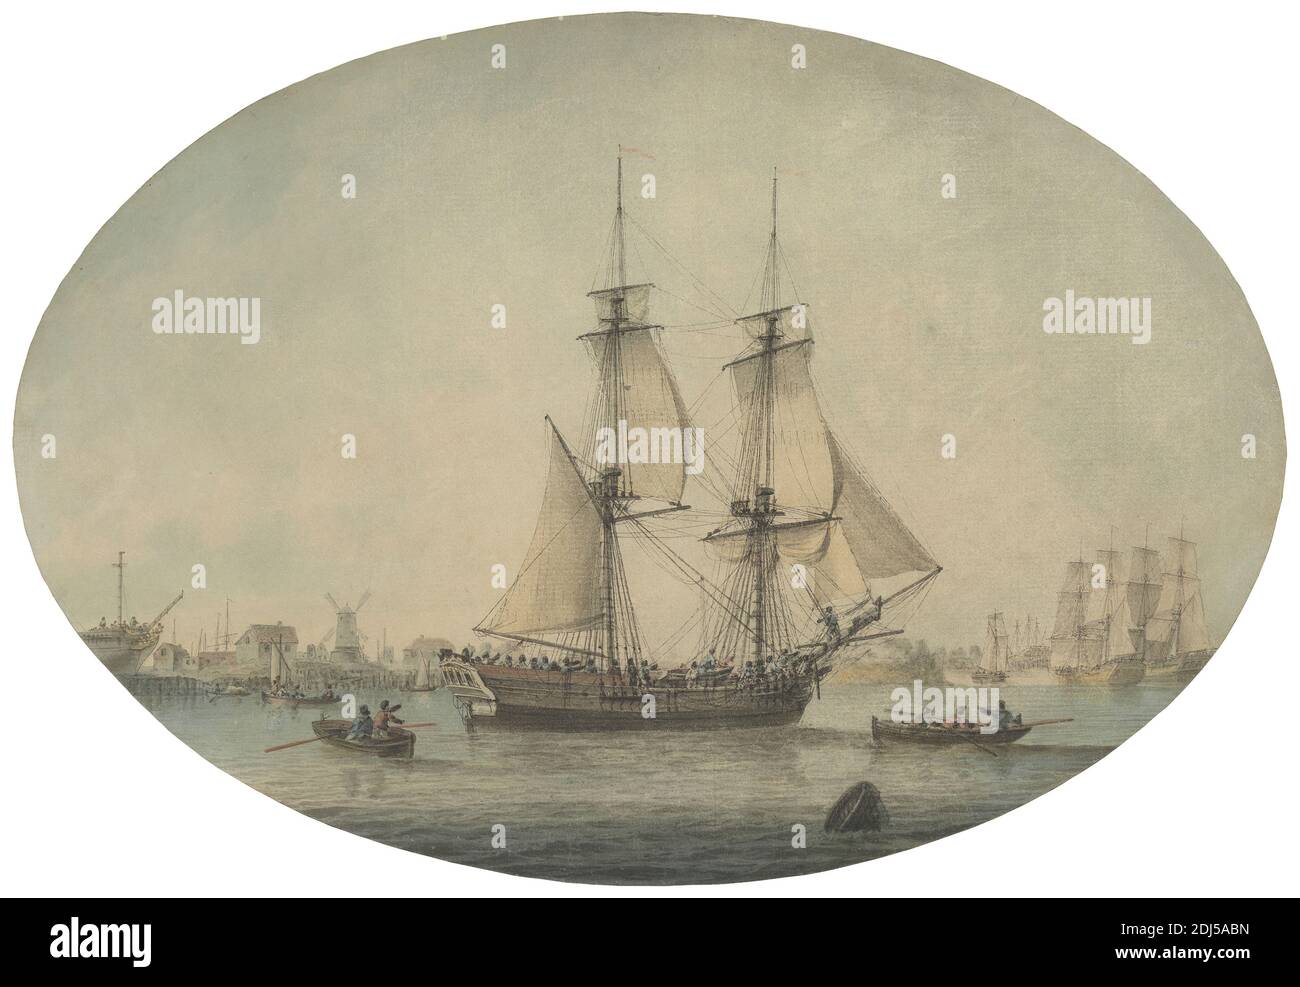 A Trading Brig Preparing to Set Sail on the Thames, Warships Running Down the Estuary Beyond, Samuel Atkins, active 1787–1808, British, active in the East Indies (1796–1804), between 1787 and 1808, Watercolor, pen, black ink, and graphite on moderately thick, slightly textured, cream laid paper, Sheet: 9 1/8 × 13 1/4 inches (23.2 × 33.7 cm), brig, cityscape, genre subject, marine art, men, oars, rowboats, rowing, seamen, ships, town, village, warships, windmill, England, Europe, Thames, United Kingdom Stock Photo